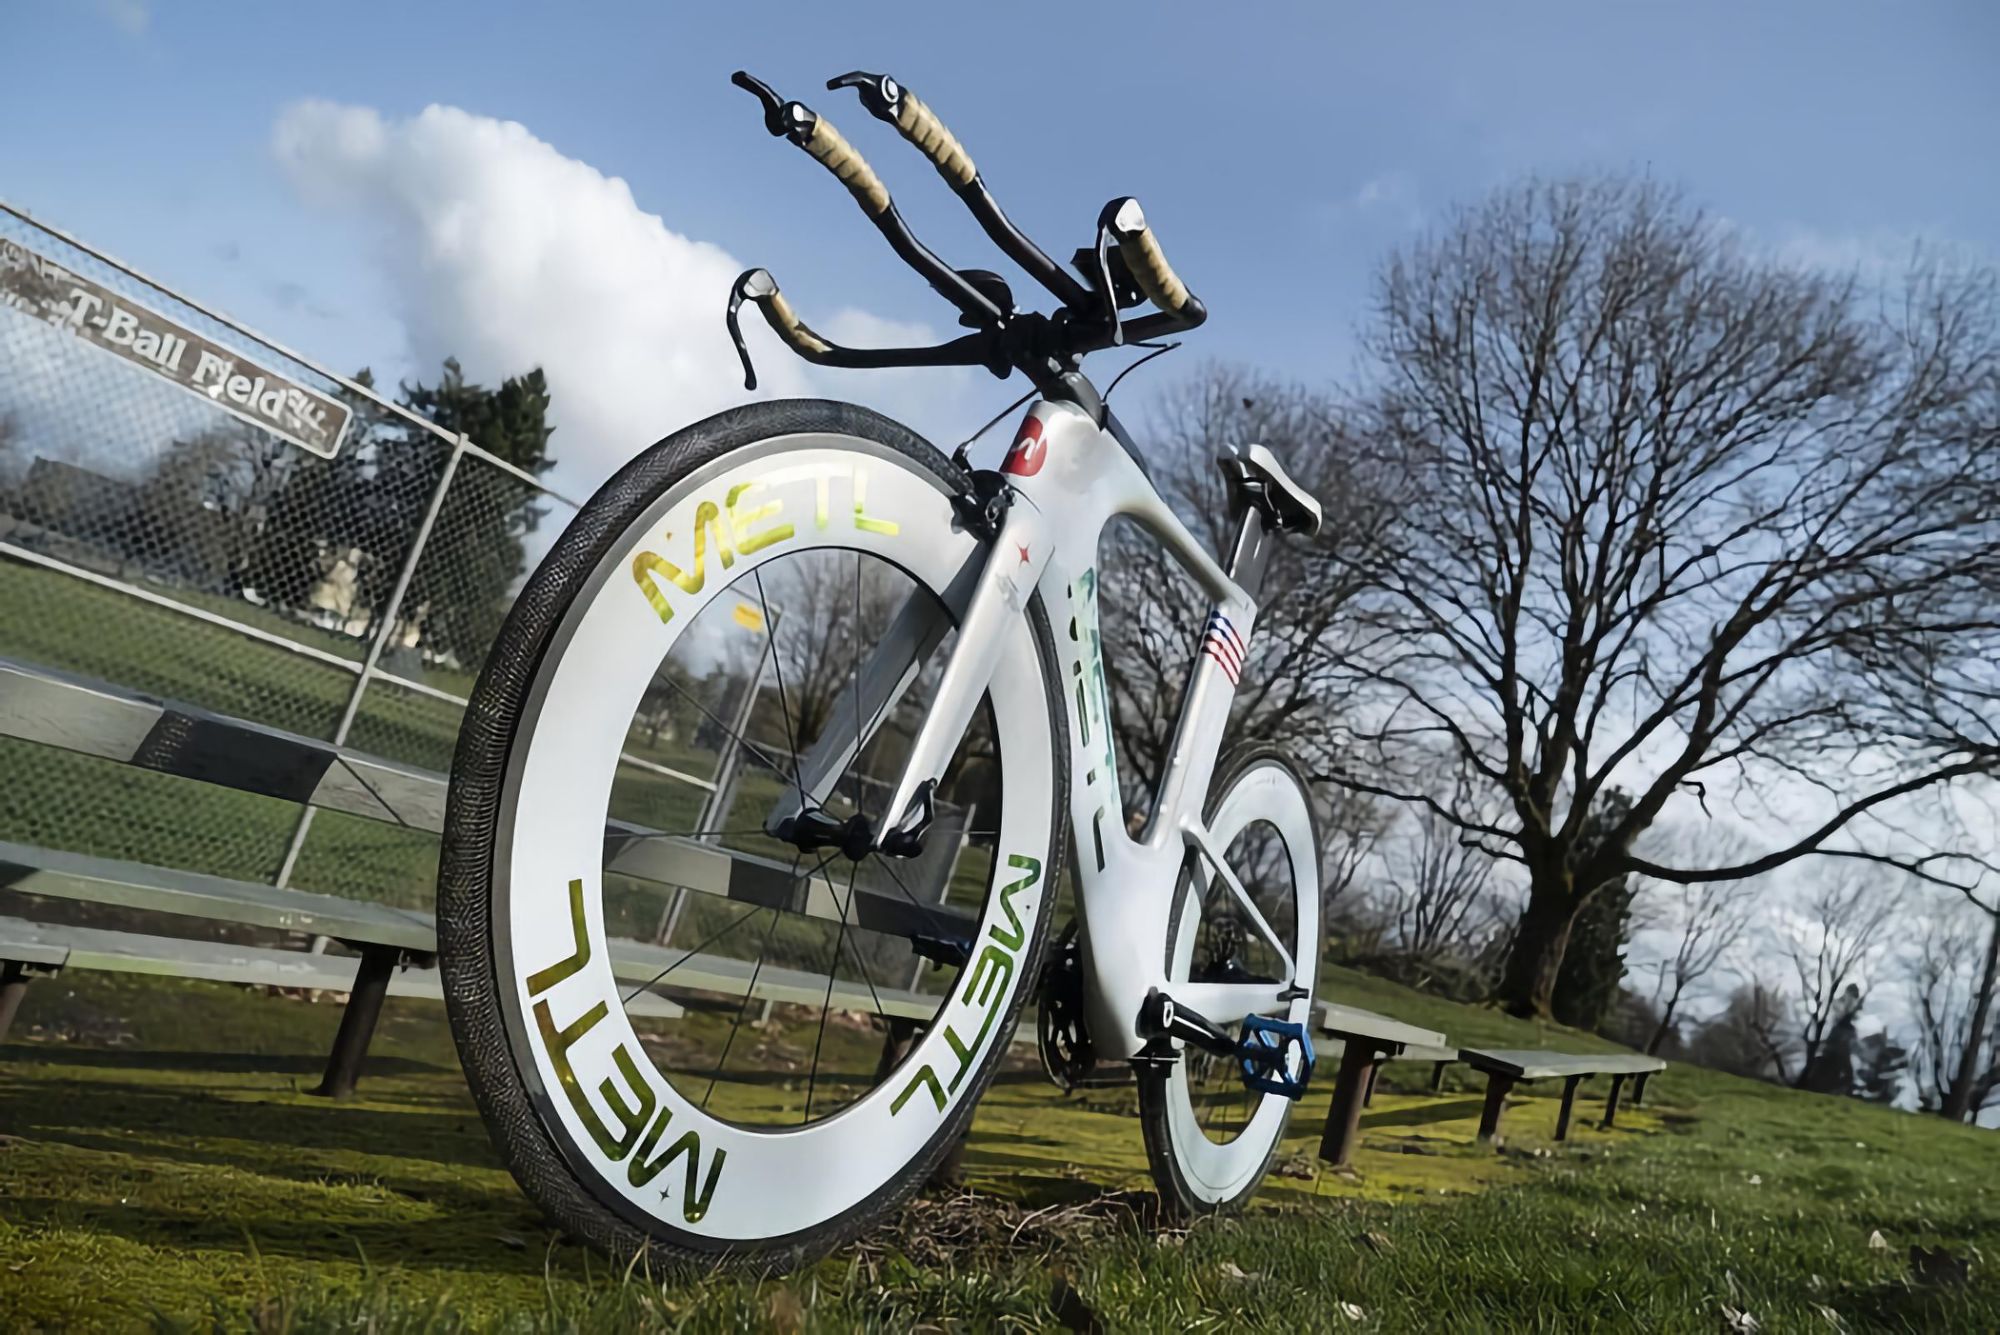 Startup founded by 'Survivor' champ debuts airless bike tires based on NASA rover tech